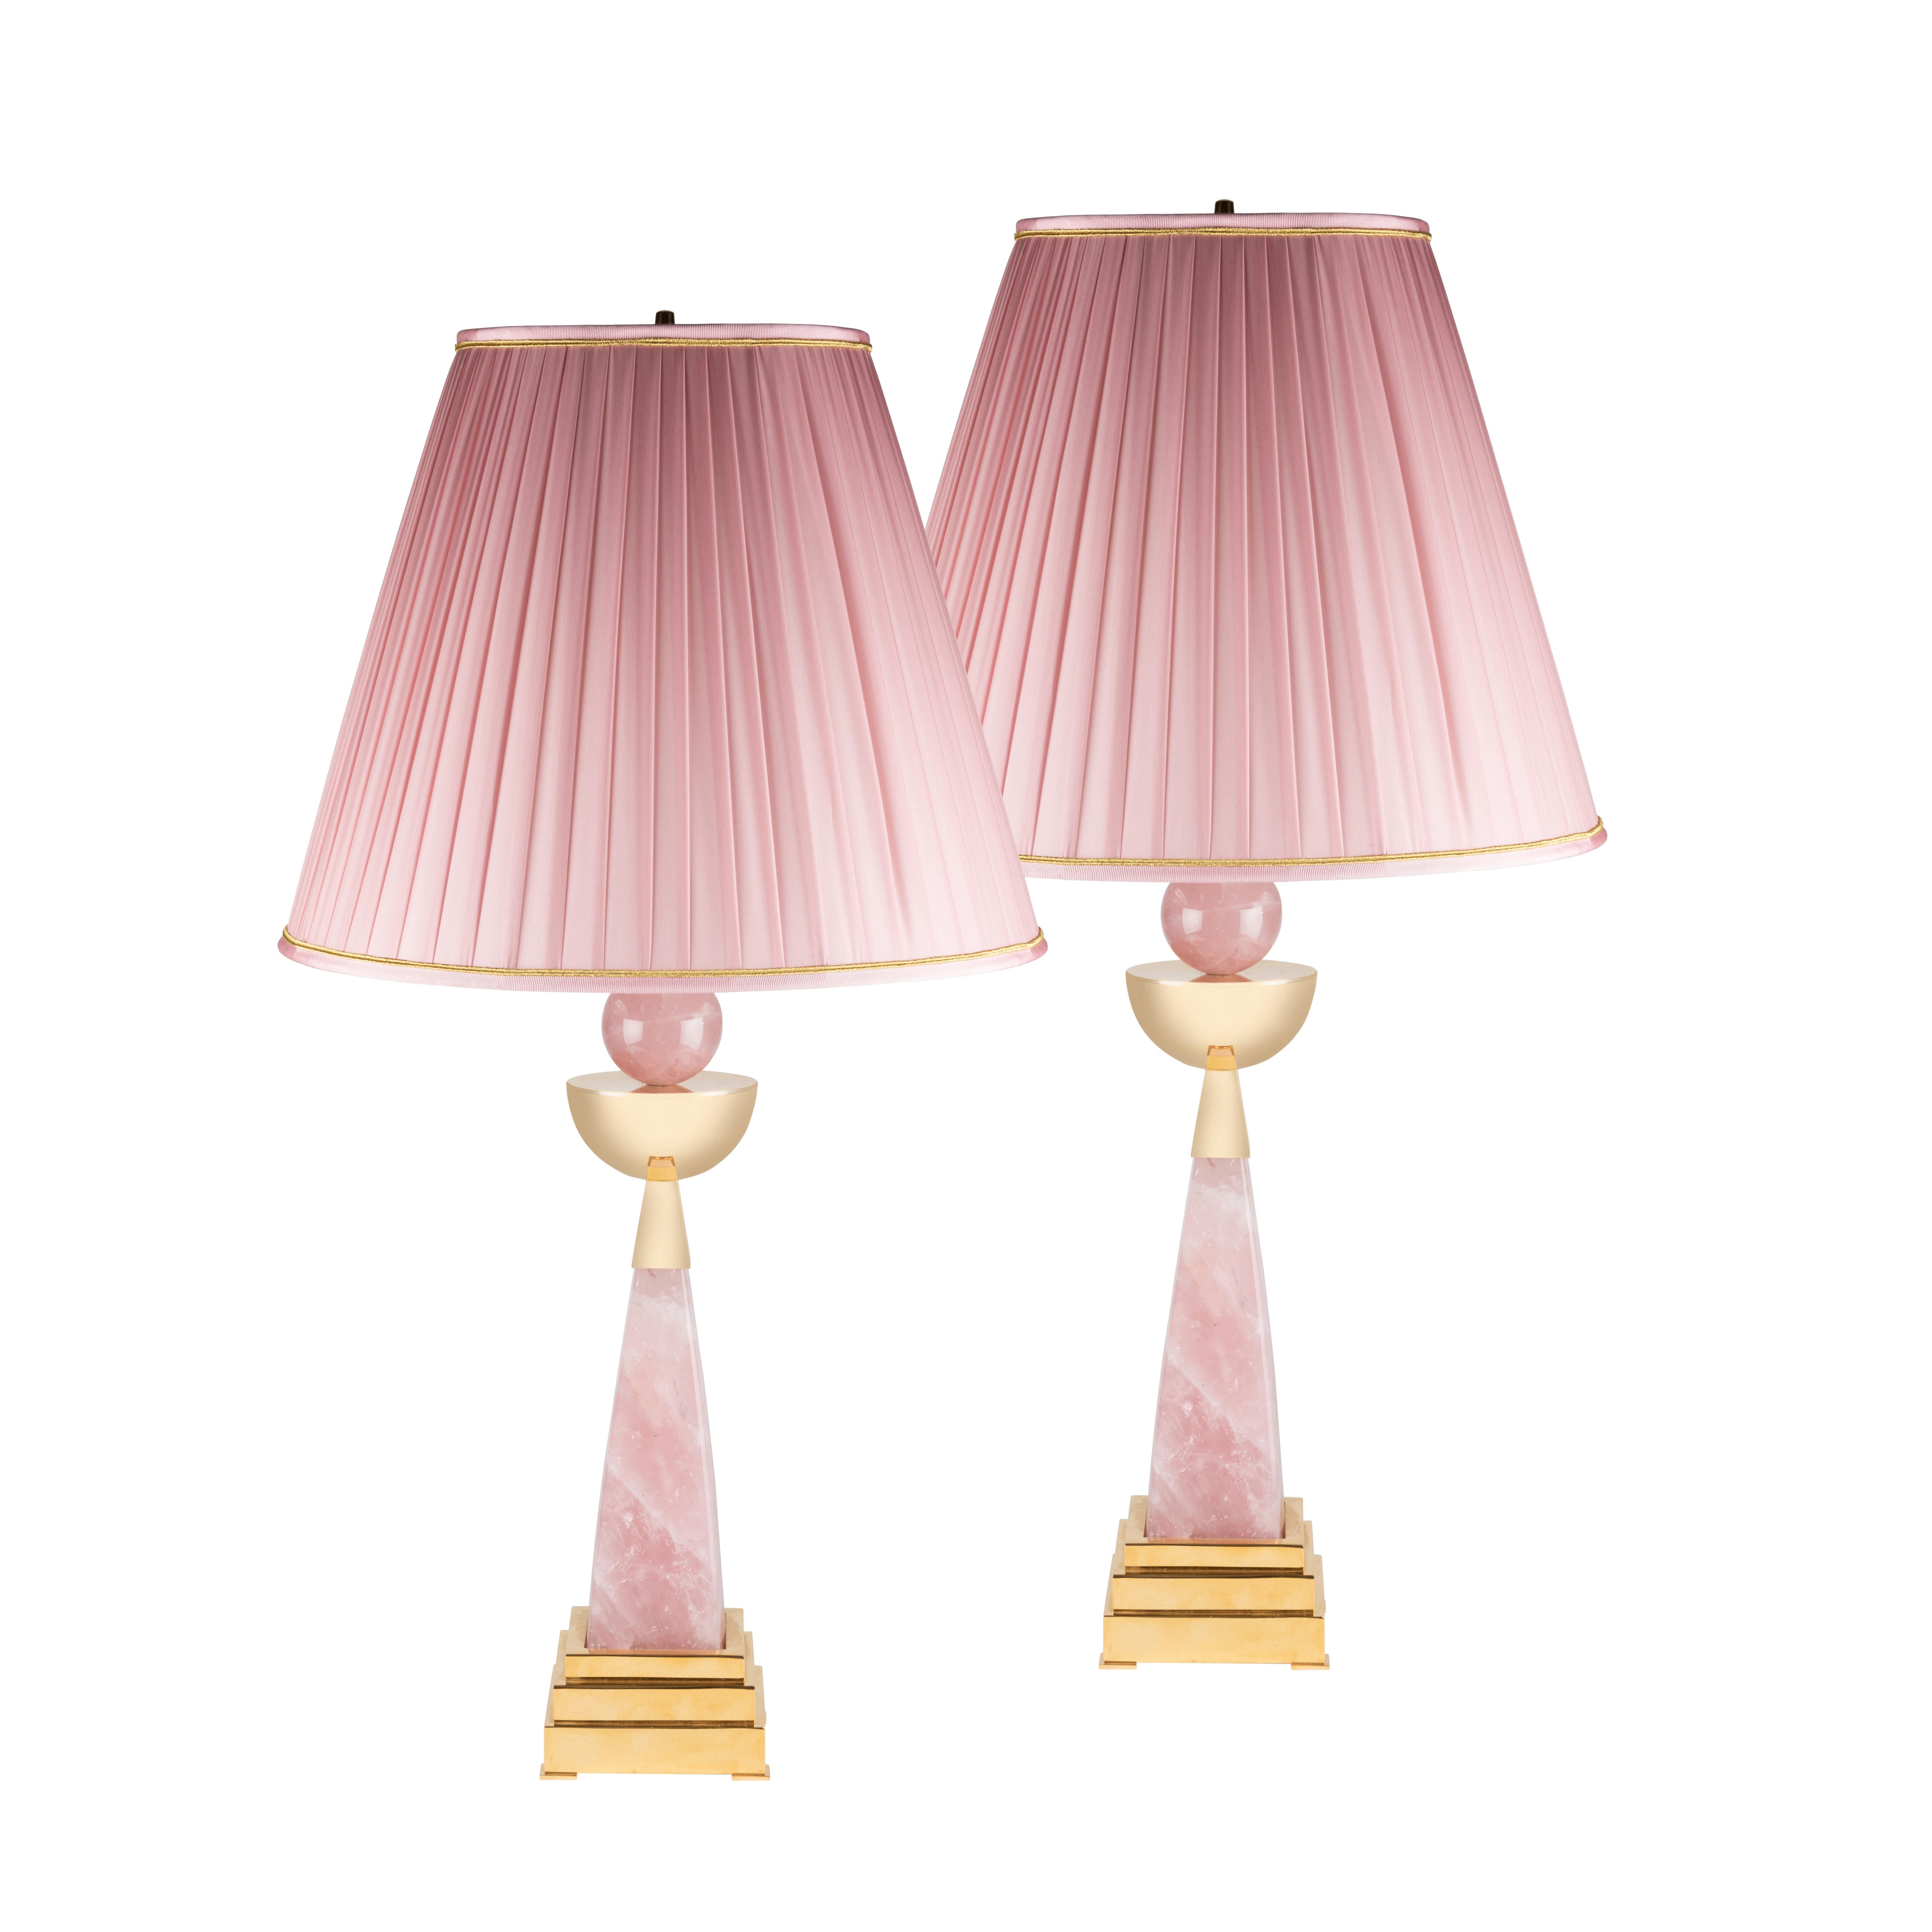 Amazing rose quartz AIKO I model design by Alexandre VOSSION.
24 gold plated brass, customized color lampshade.
Made in PARIS.